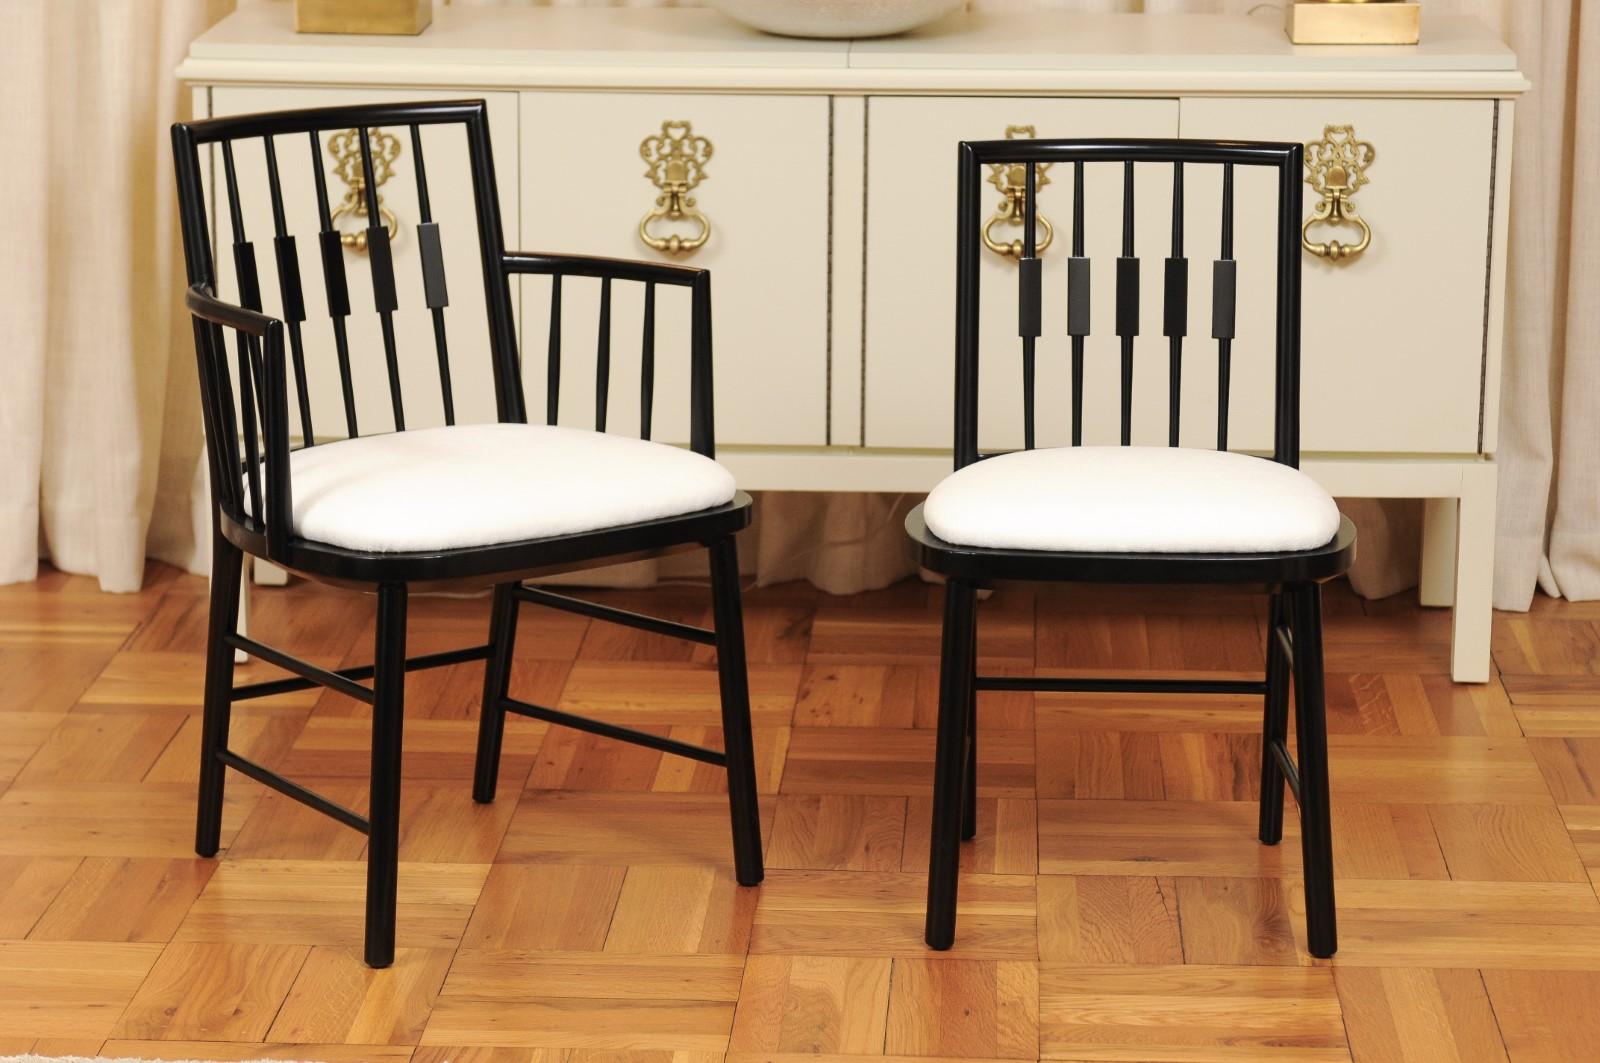 These magnificent dining chairs are shipped as professionally photographed and described in the listing narrative: Meticulously professionally restored and installation ready. Expert custom upholstery service is available.

A fantastic set of twelve